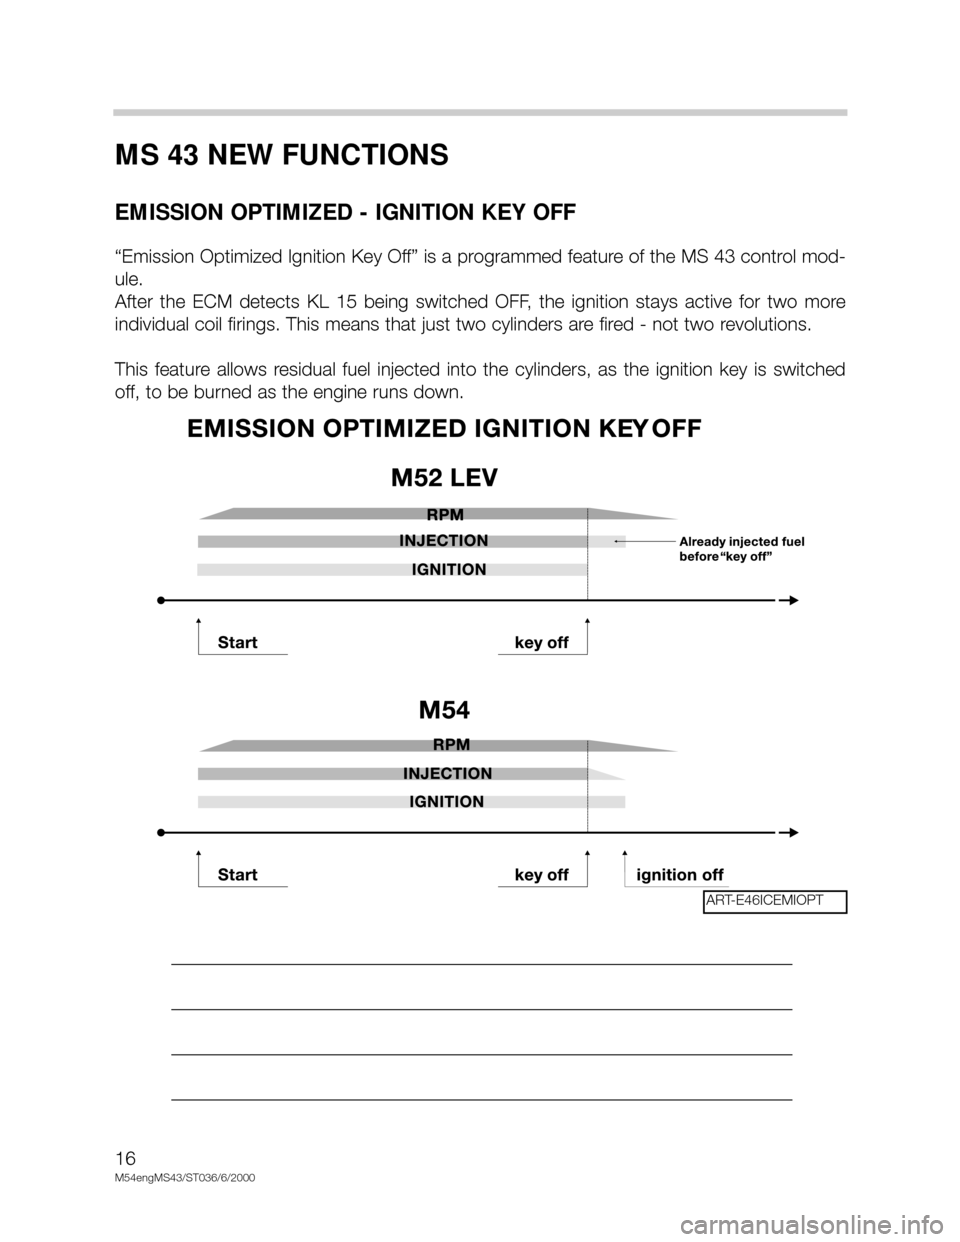 BMW X5 2001 E53 M54 Engine Workshop Manual 16
M54engMS43/ST036/6/2000
MS 43 NEW FUNCTIONS
EMISSION OPTIMIZED - IGNITION KEY OFF
“Emission Optimized Ignition Key Off” is a programmed feature of the MS 43 control mod-
ule. 
After  the  ECM  